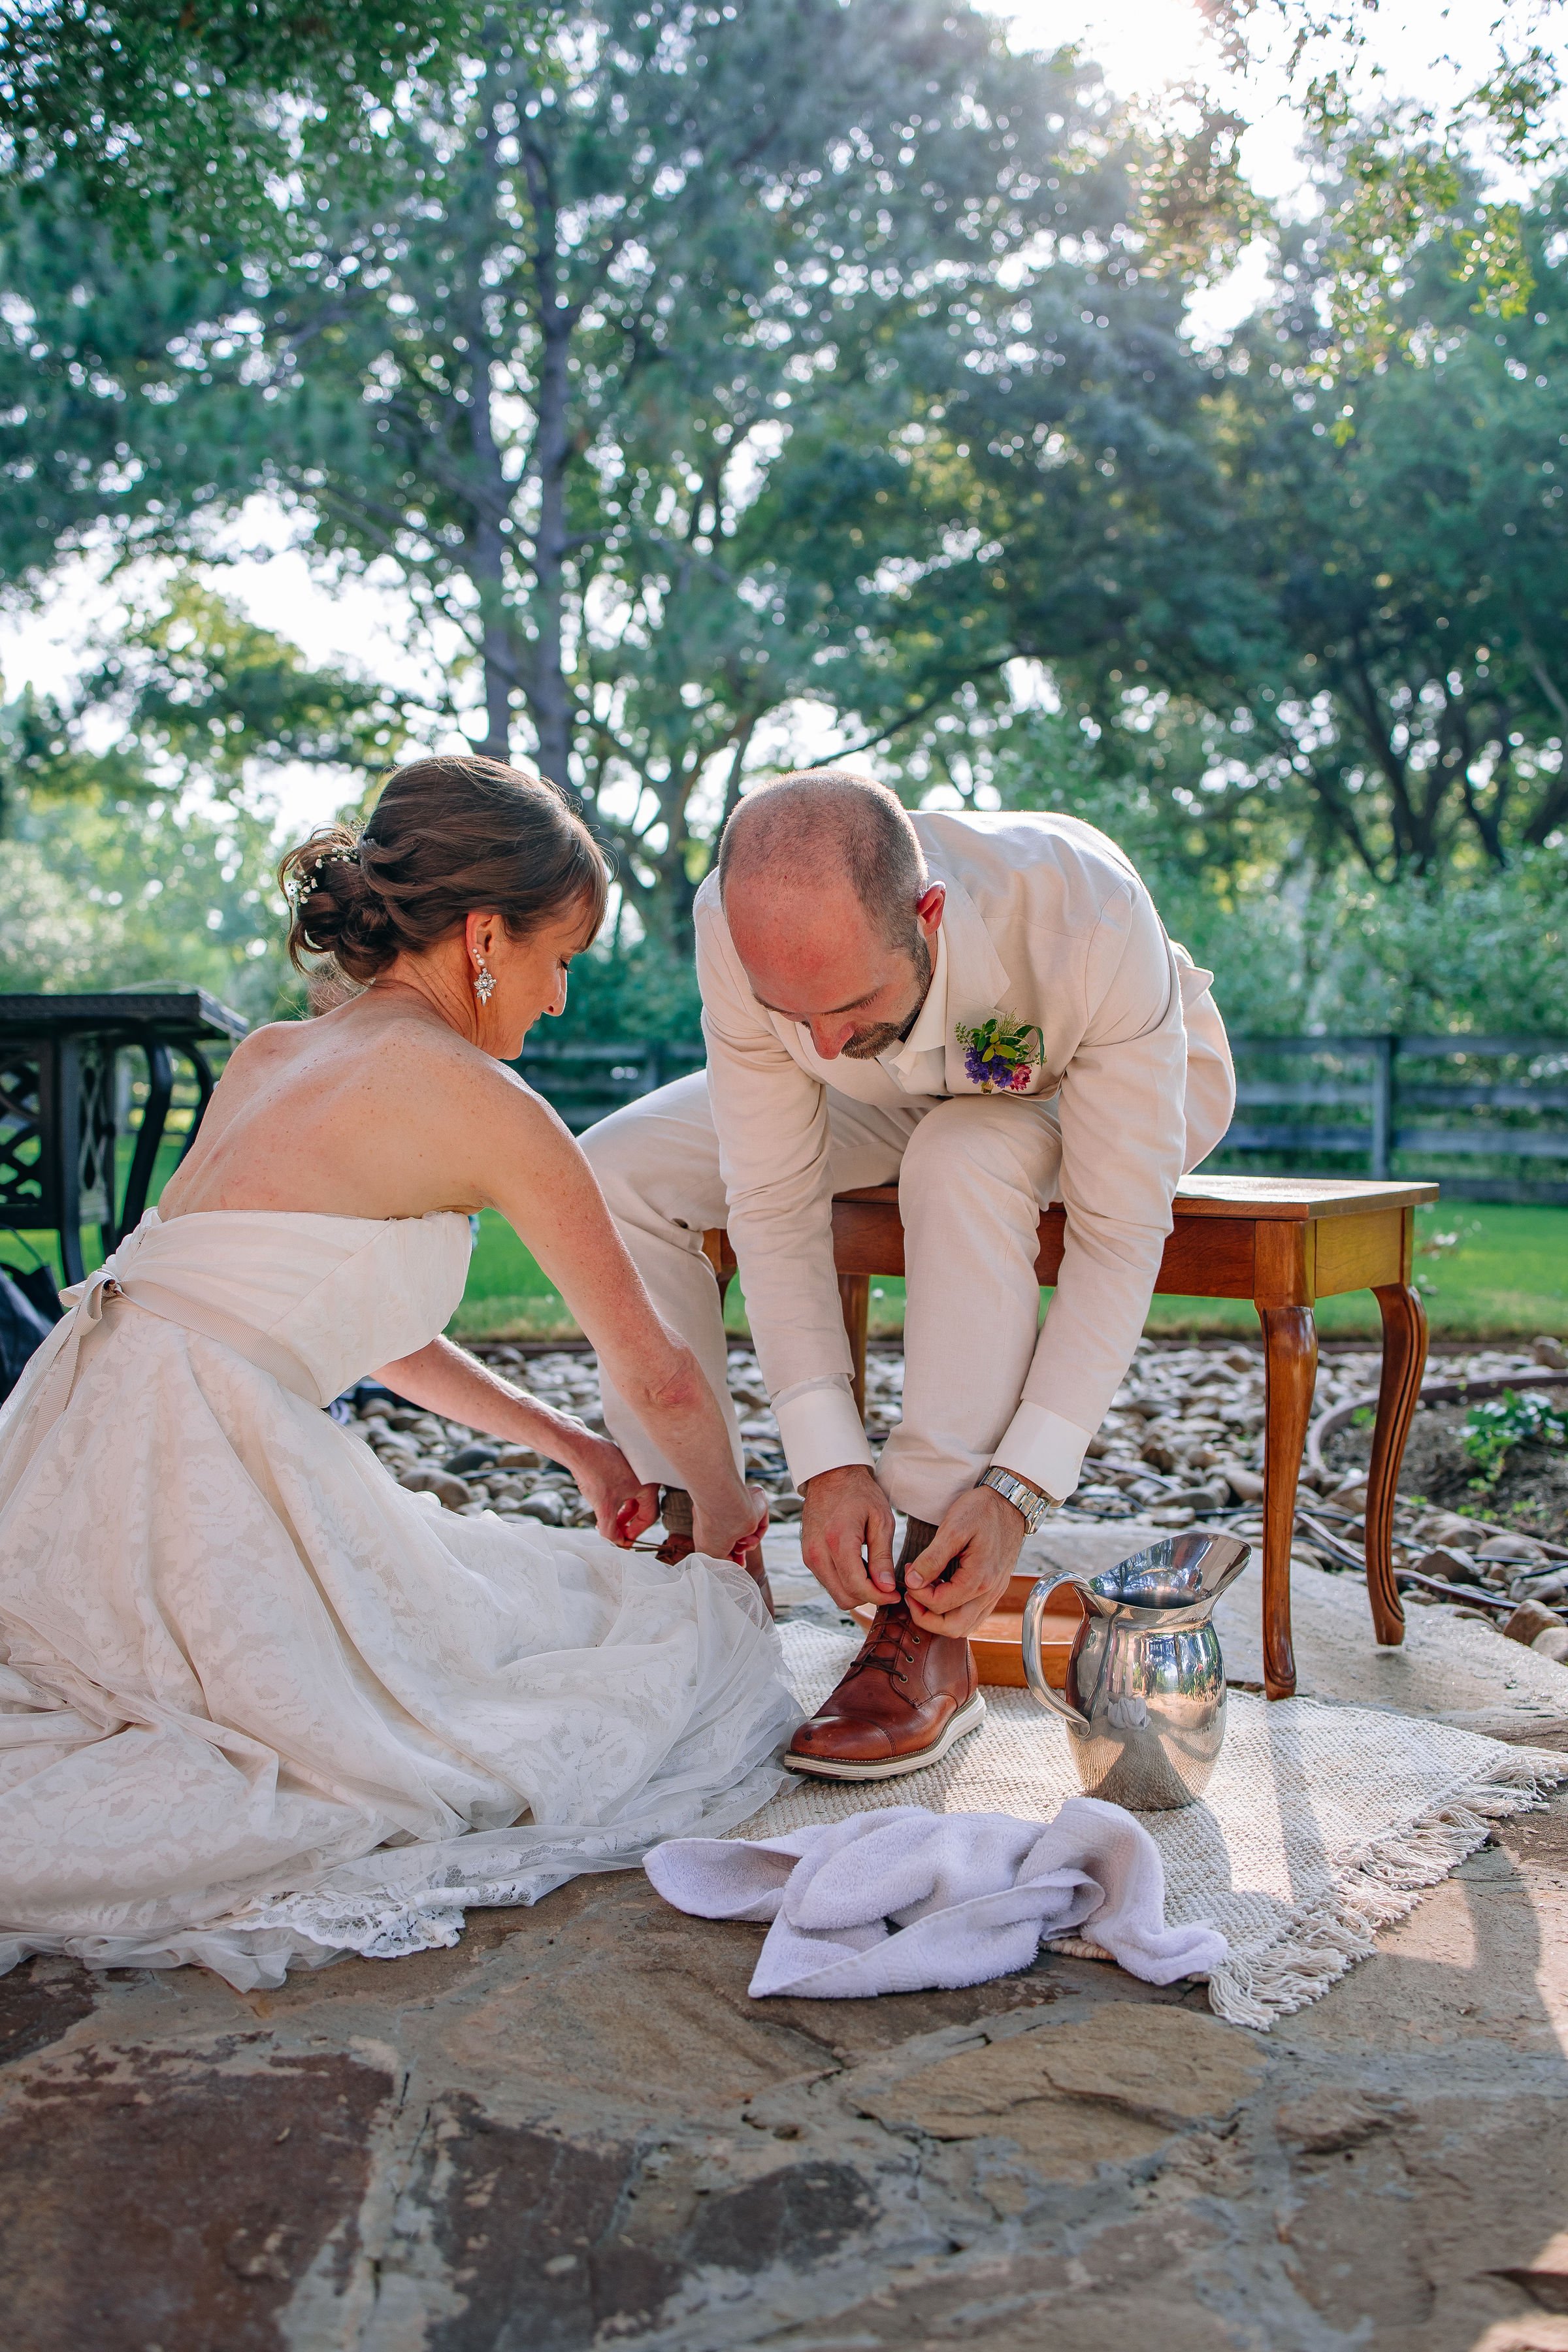 Bride washing groom's feet at an outdoor backyard wedding. Flowers by Plano, Texas florist Terra Cotta Blooms. Photo by Radiant Film &amp; Photo.